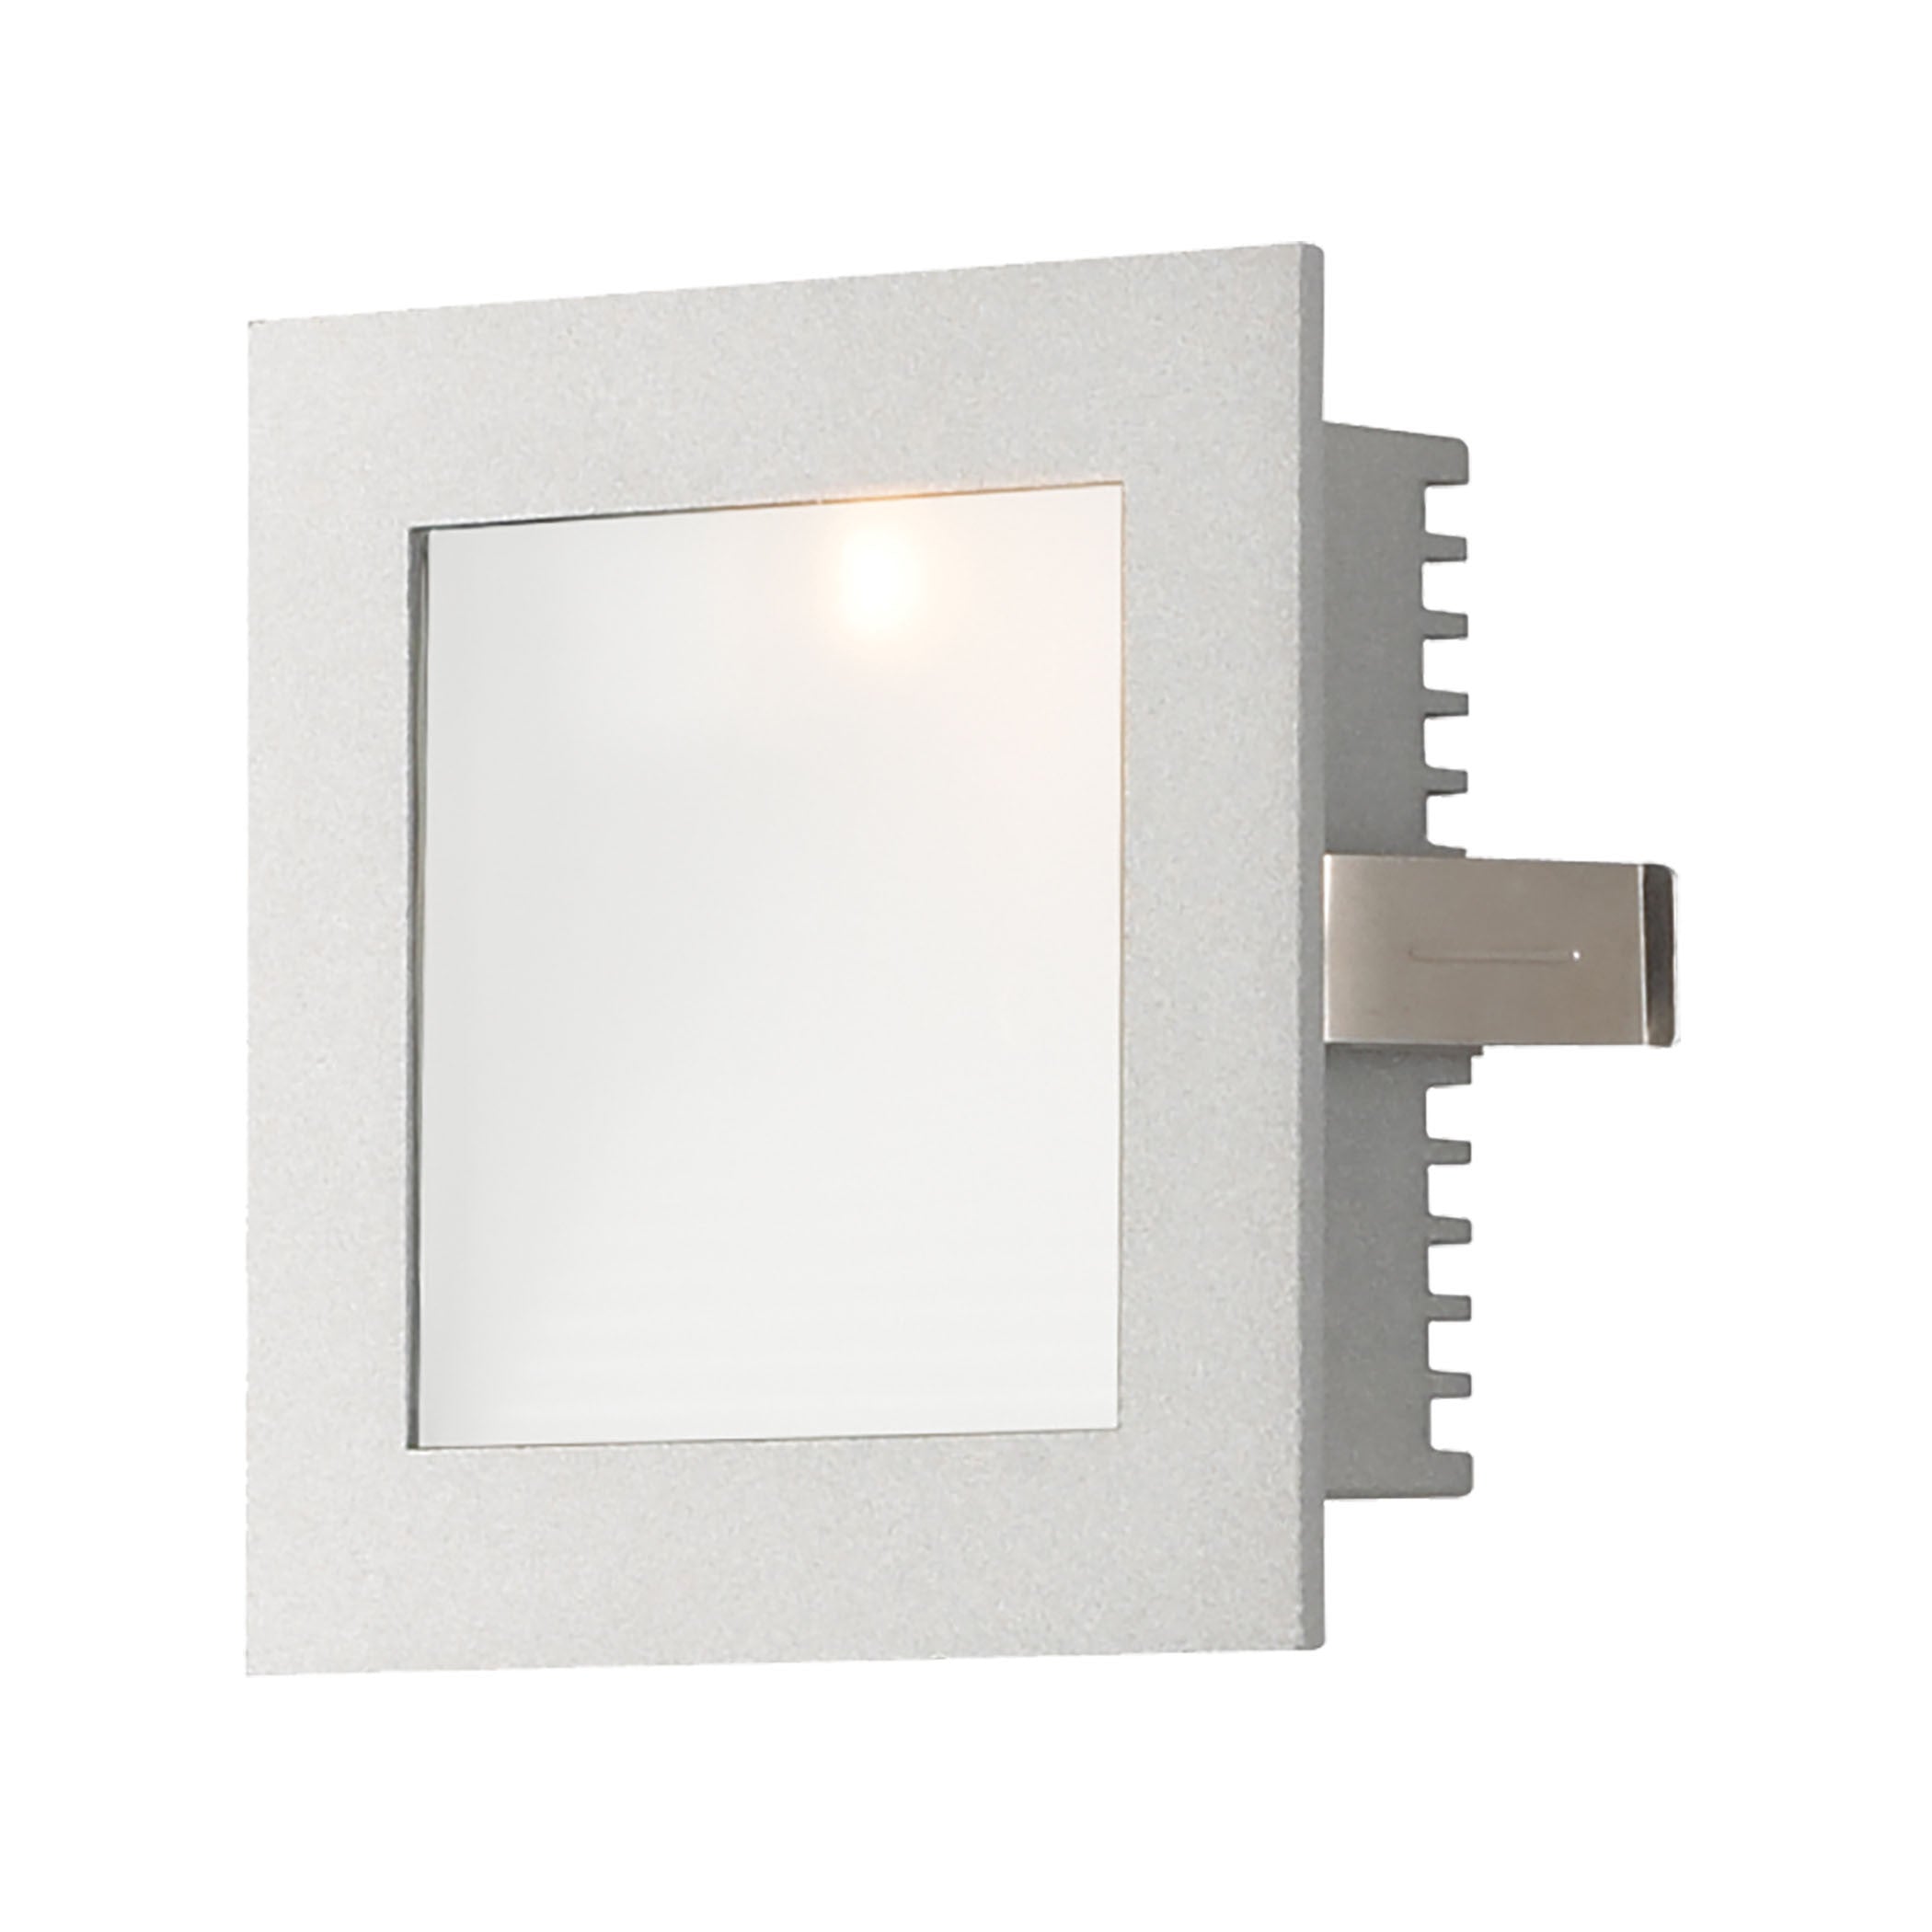 Alico Wle-101 Steplight Led Collection Opal,grey Finish Steplight